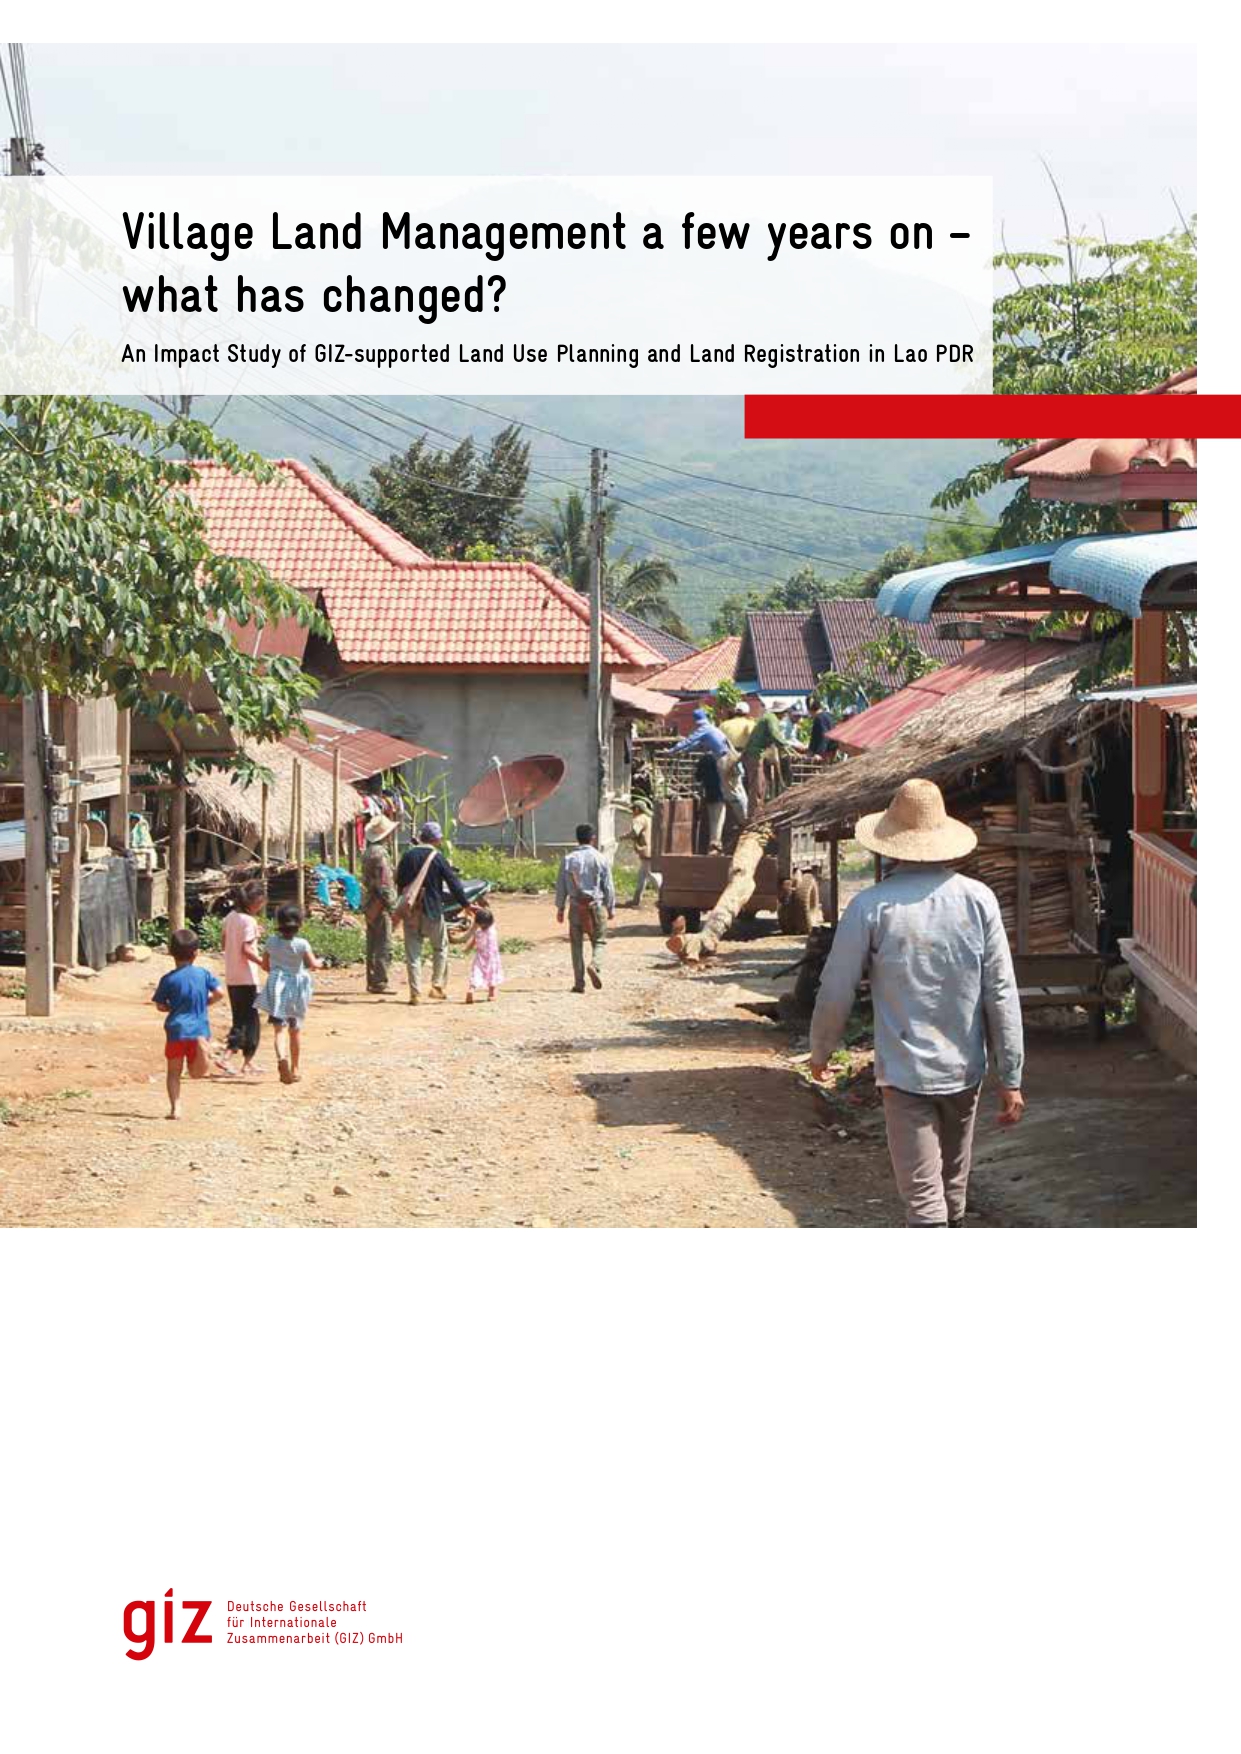 GIZ (2019) Village Land Management a few years on. An Impact Study of GIZ supported Land Use Planning and Land Registration in Lao PDR .jpg